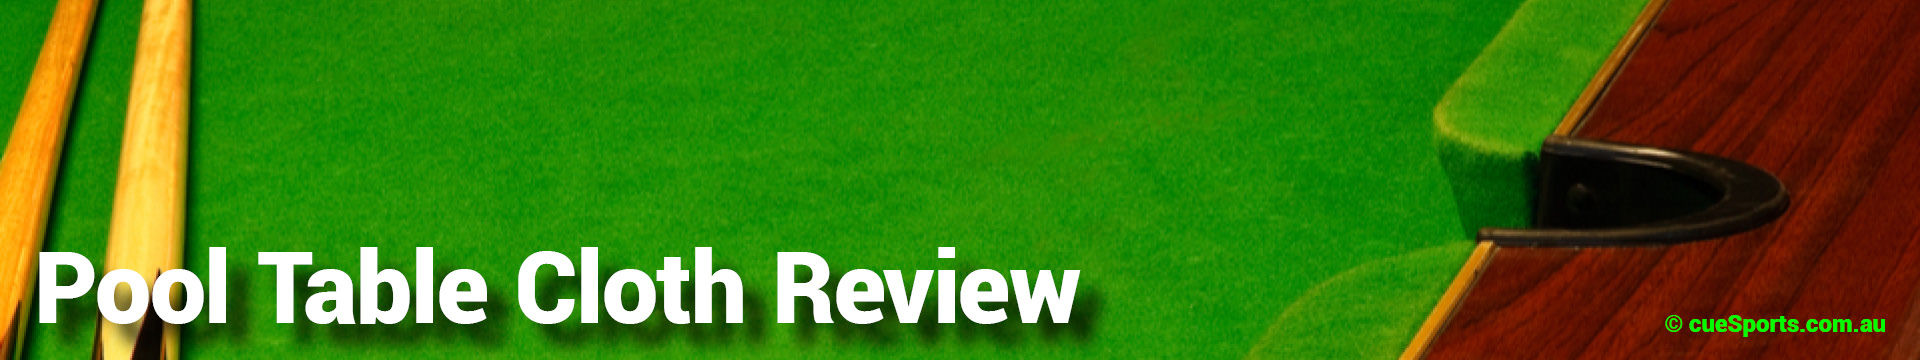 Pool Table Cloth Review